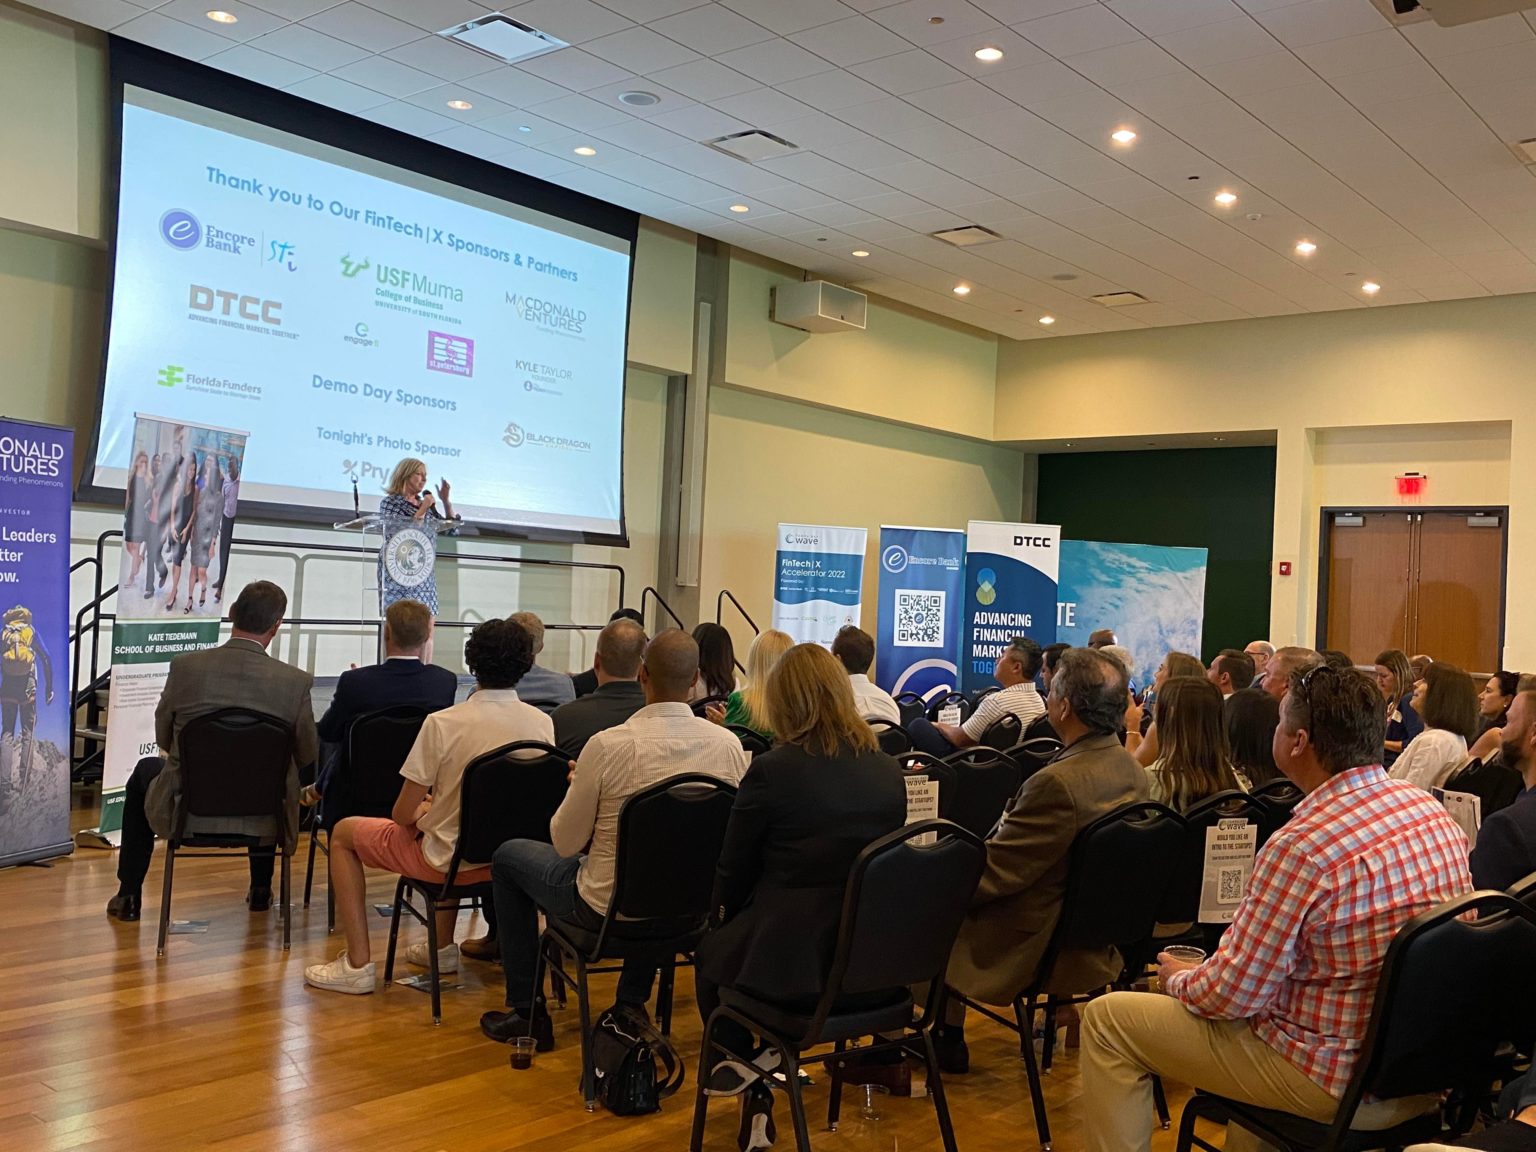 Tampa Bay Wave founder Linda Olson welcomes the attendees at the fintech accelerator program pitch night event in St. Petersburg. Photo by Veronica Brezina.